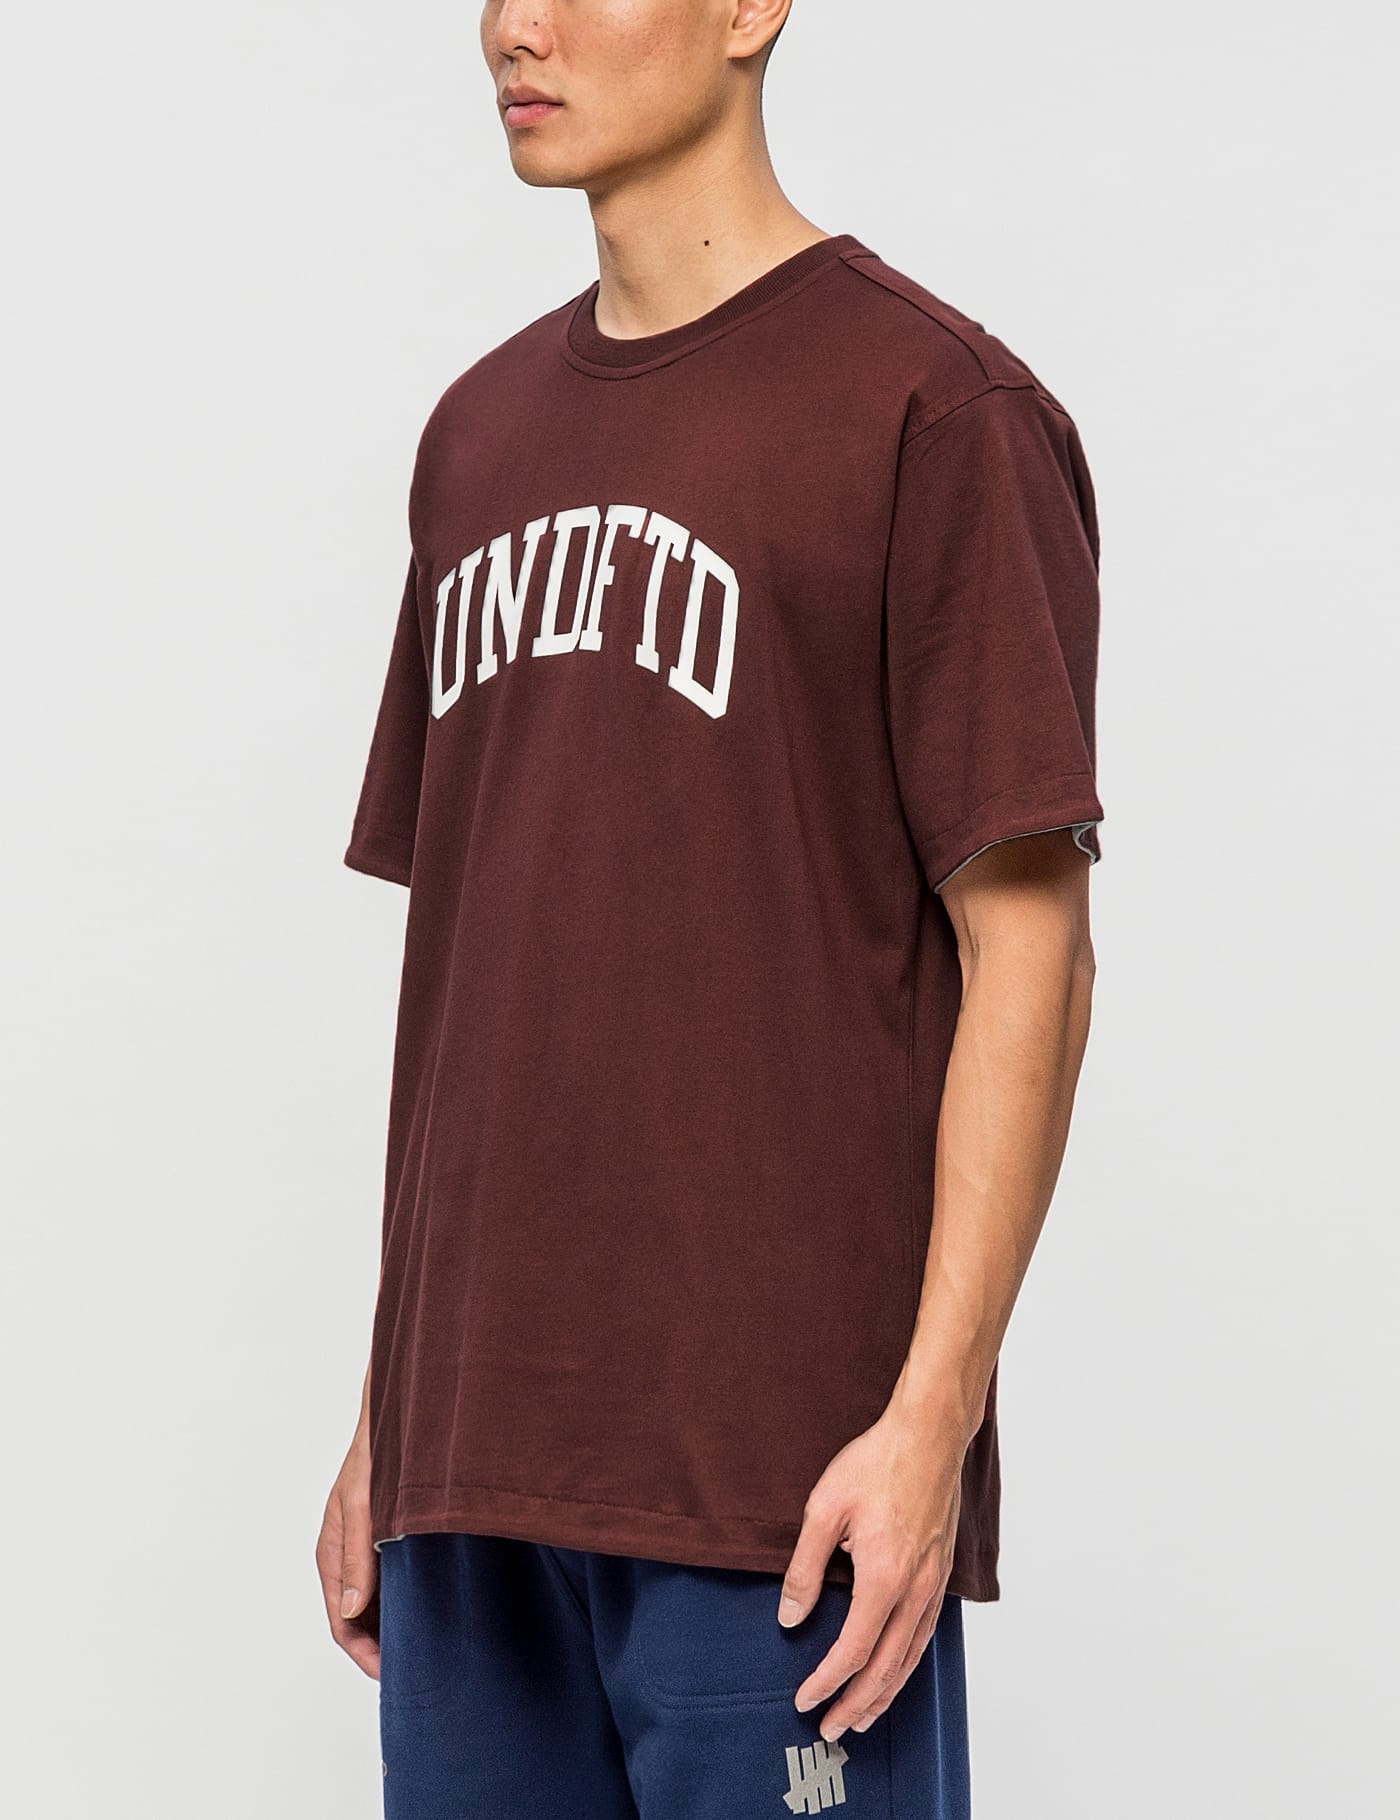 Undefeated - Reversible Crewneck T-Shirt | HBX - Globally Curated 